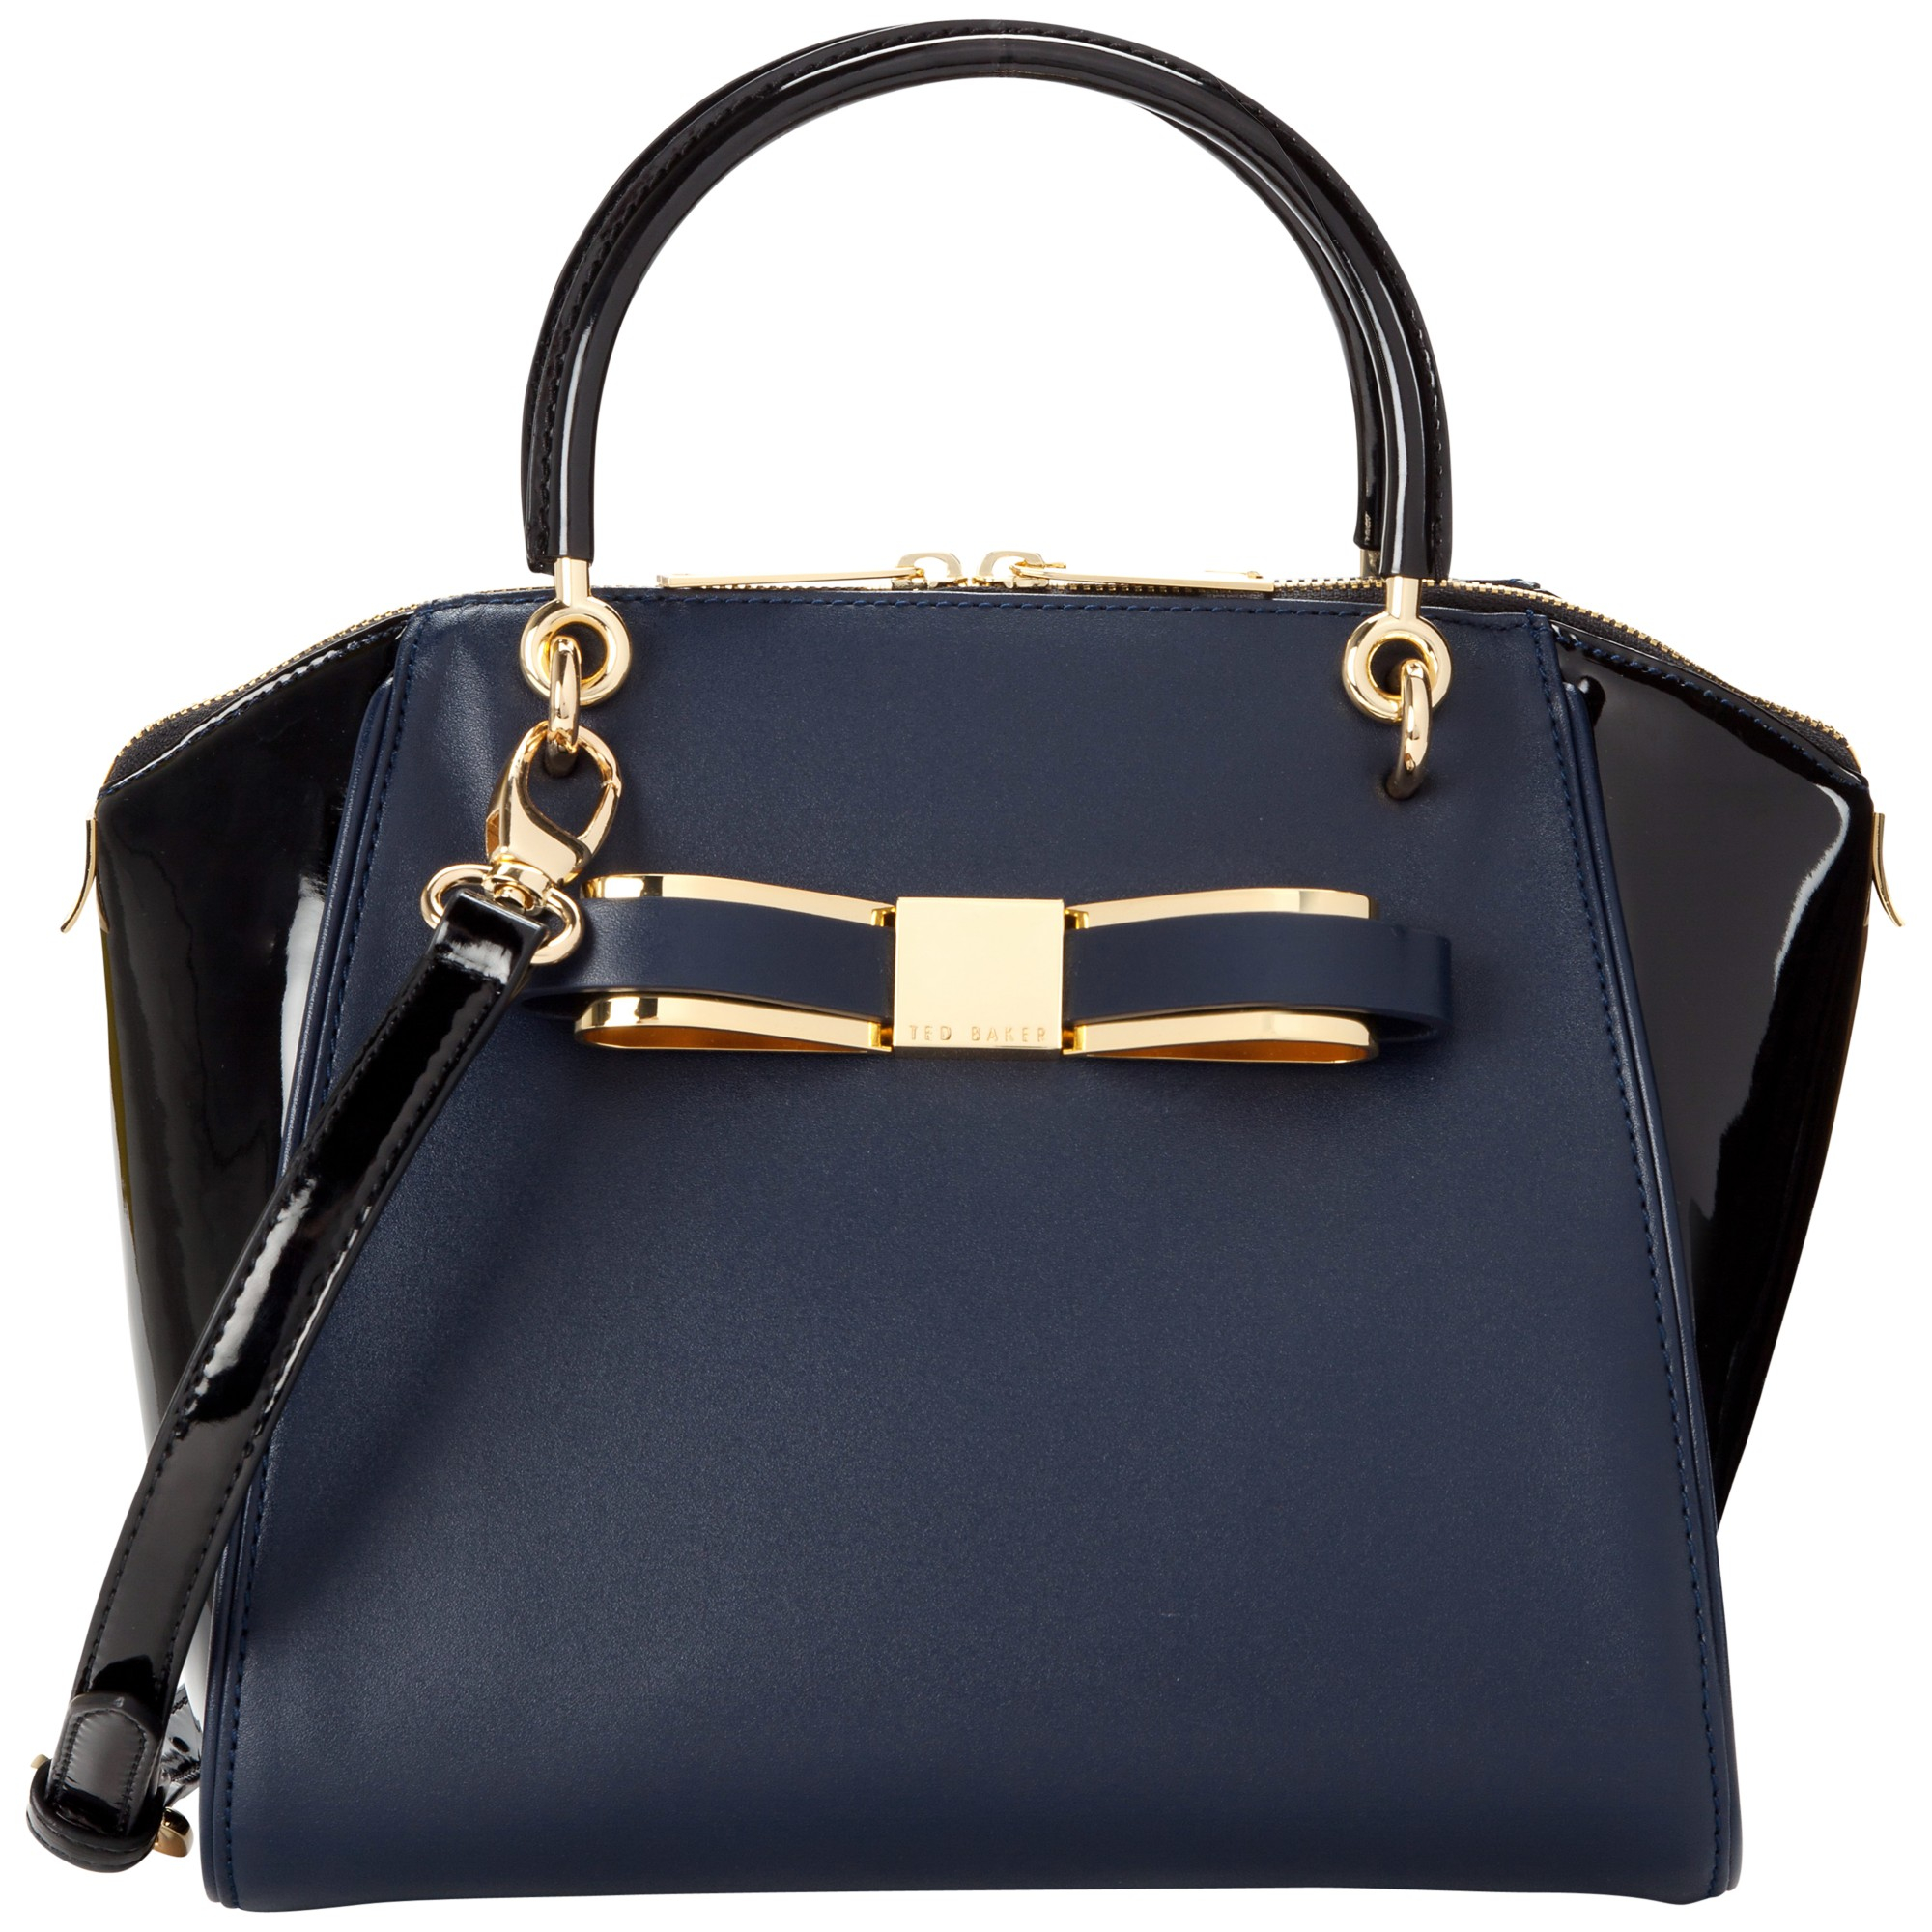 Ted Baker Patent Blocked Bow Leather Tote Bag in Blue (navy) | Lyst